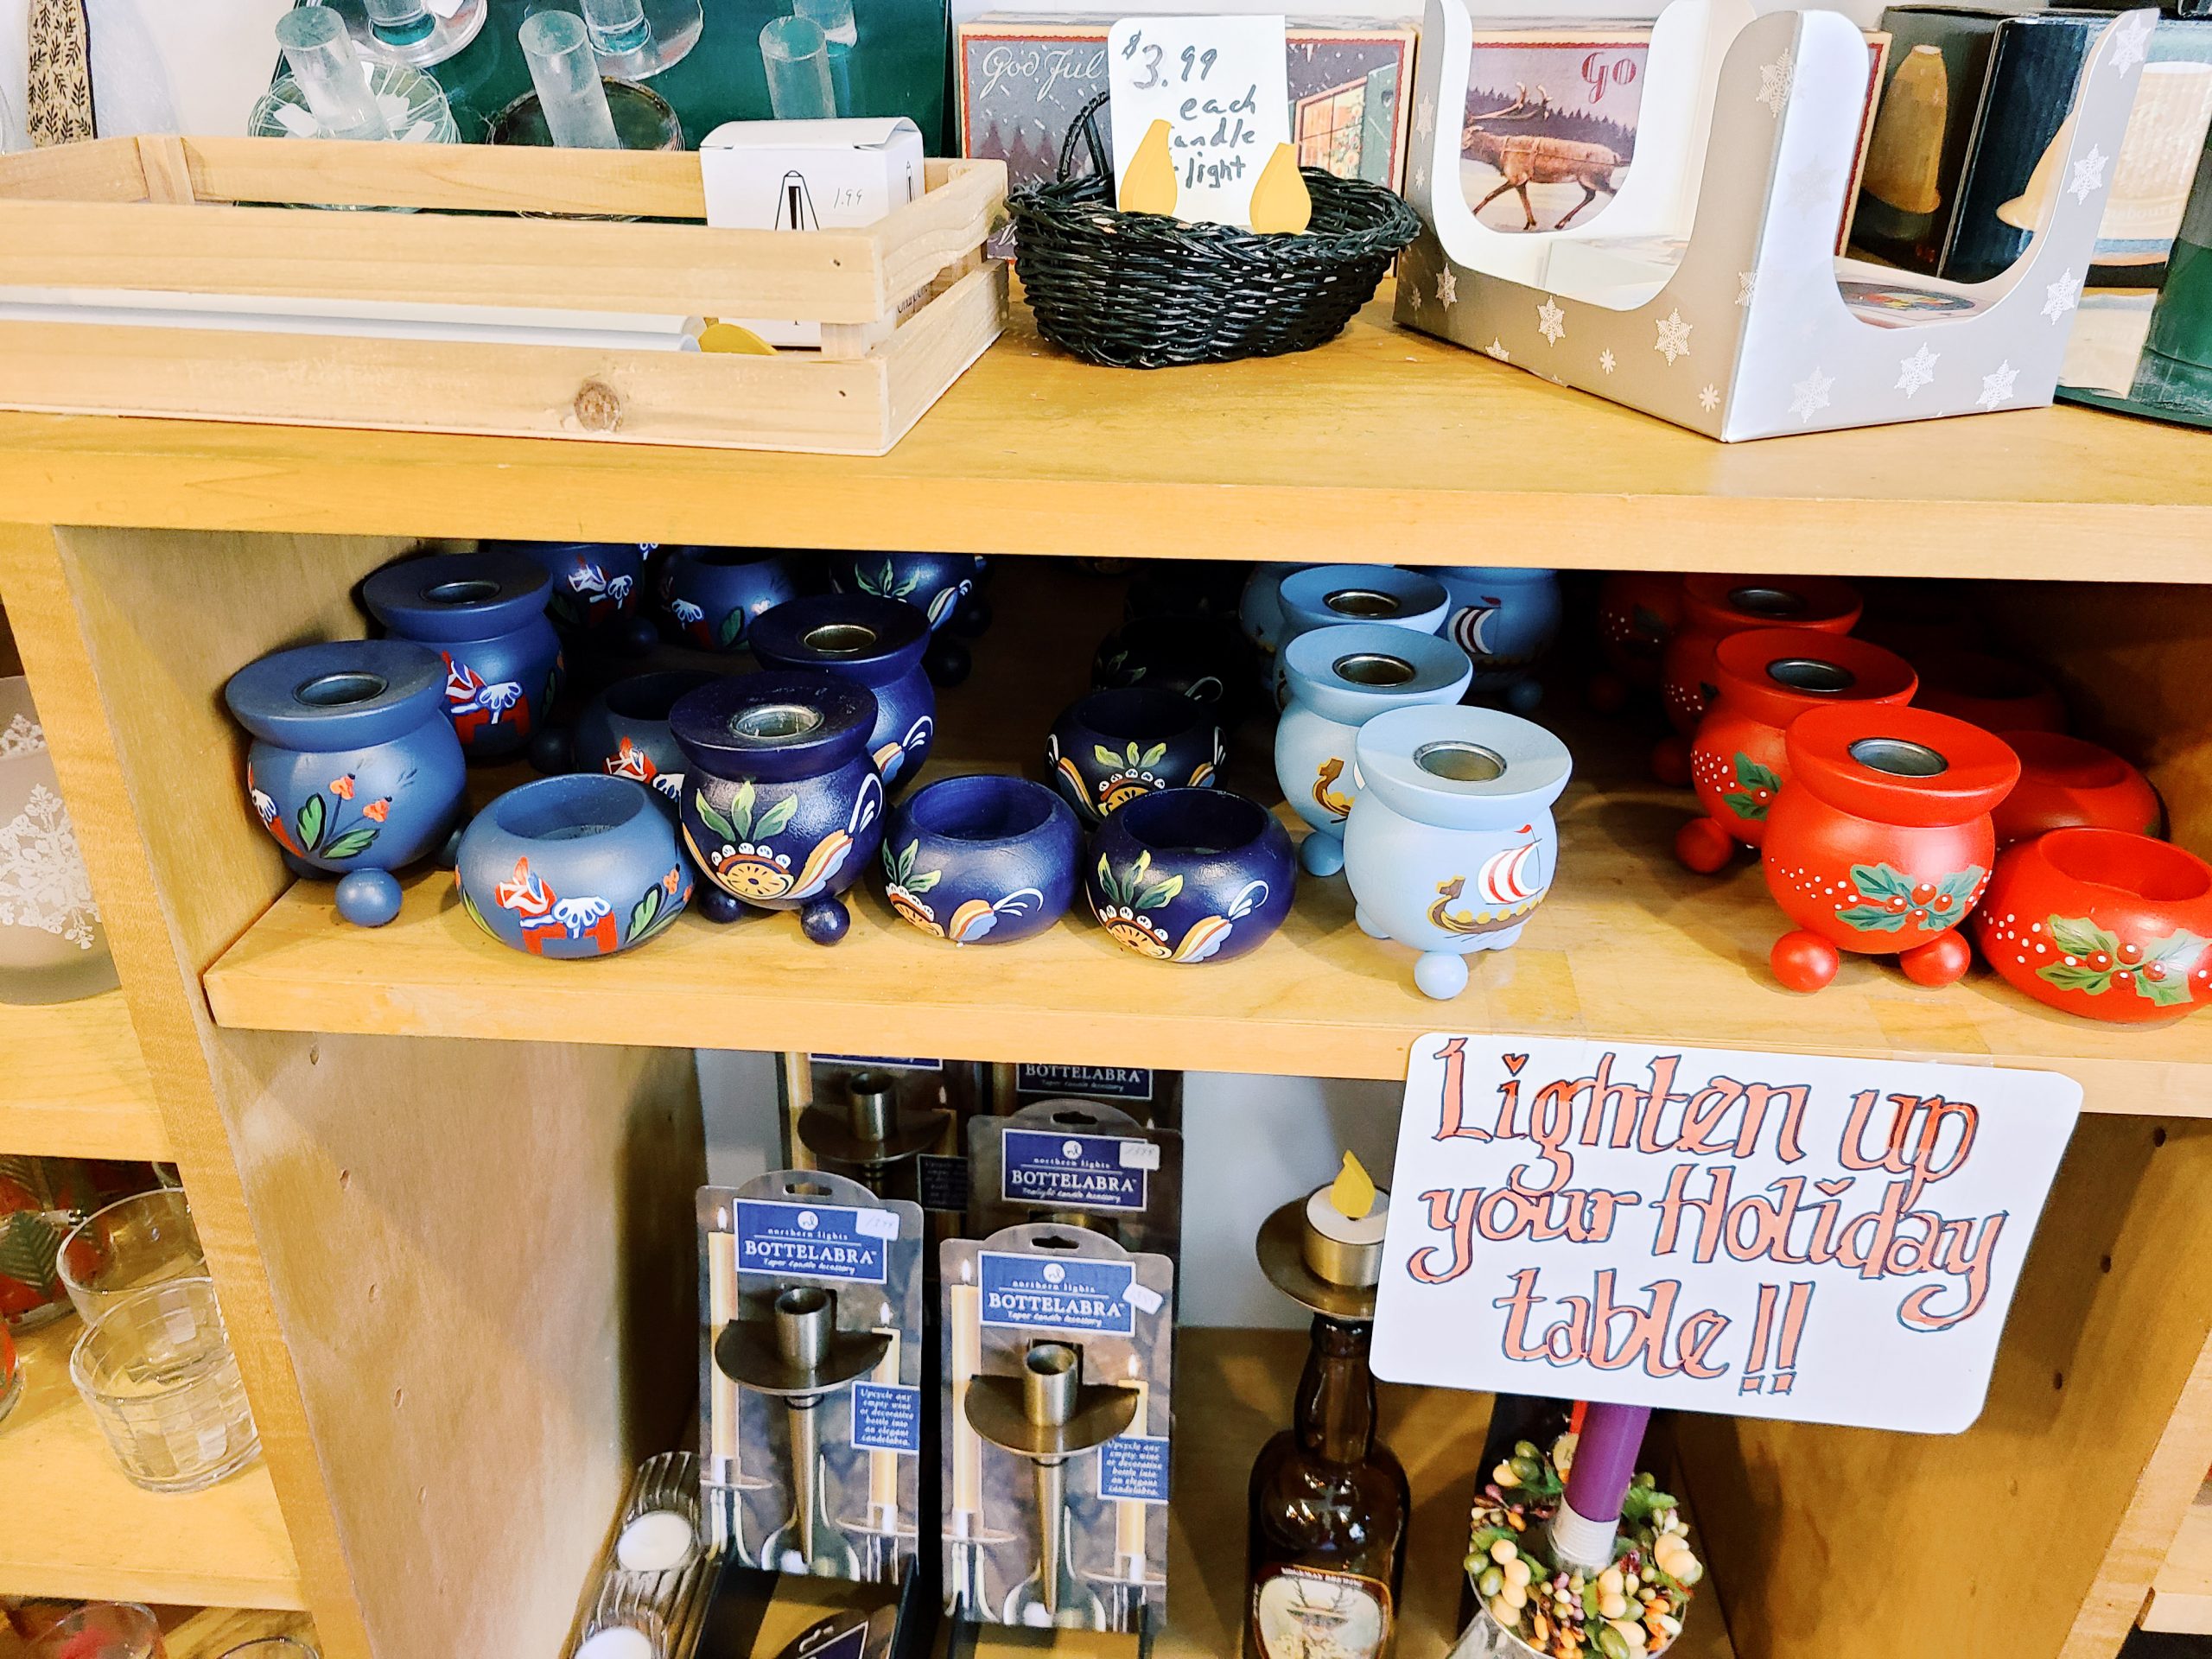 A shelf of souvenirs and gifts at Bestemors